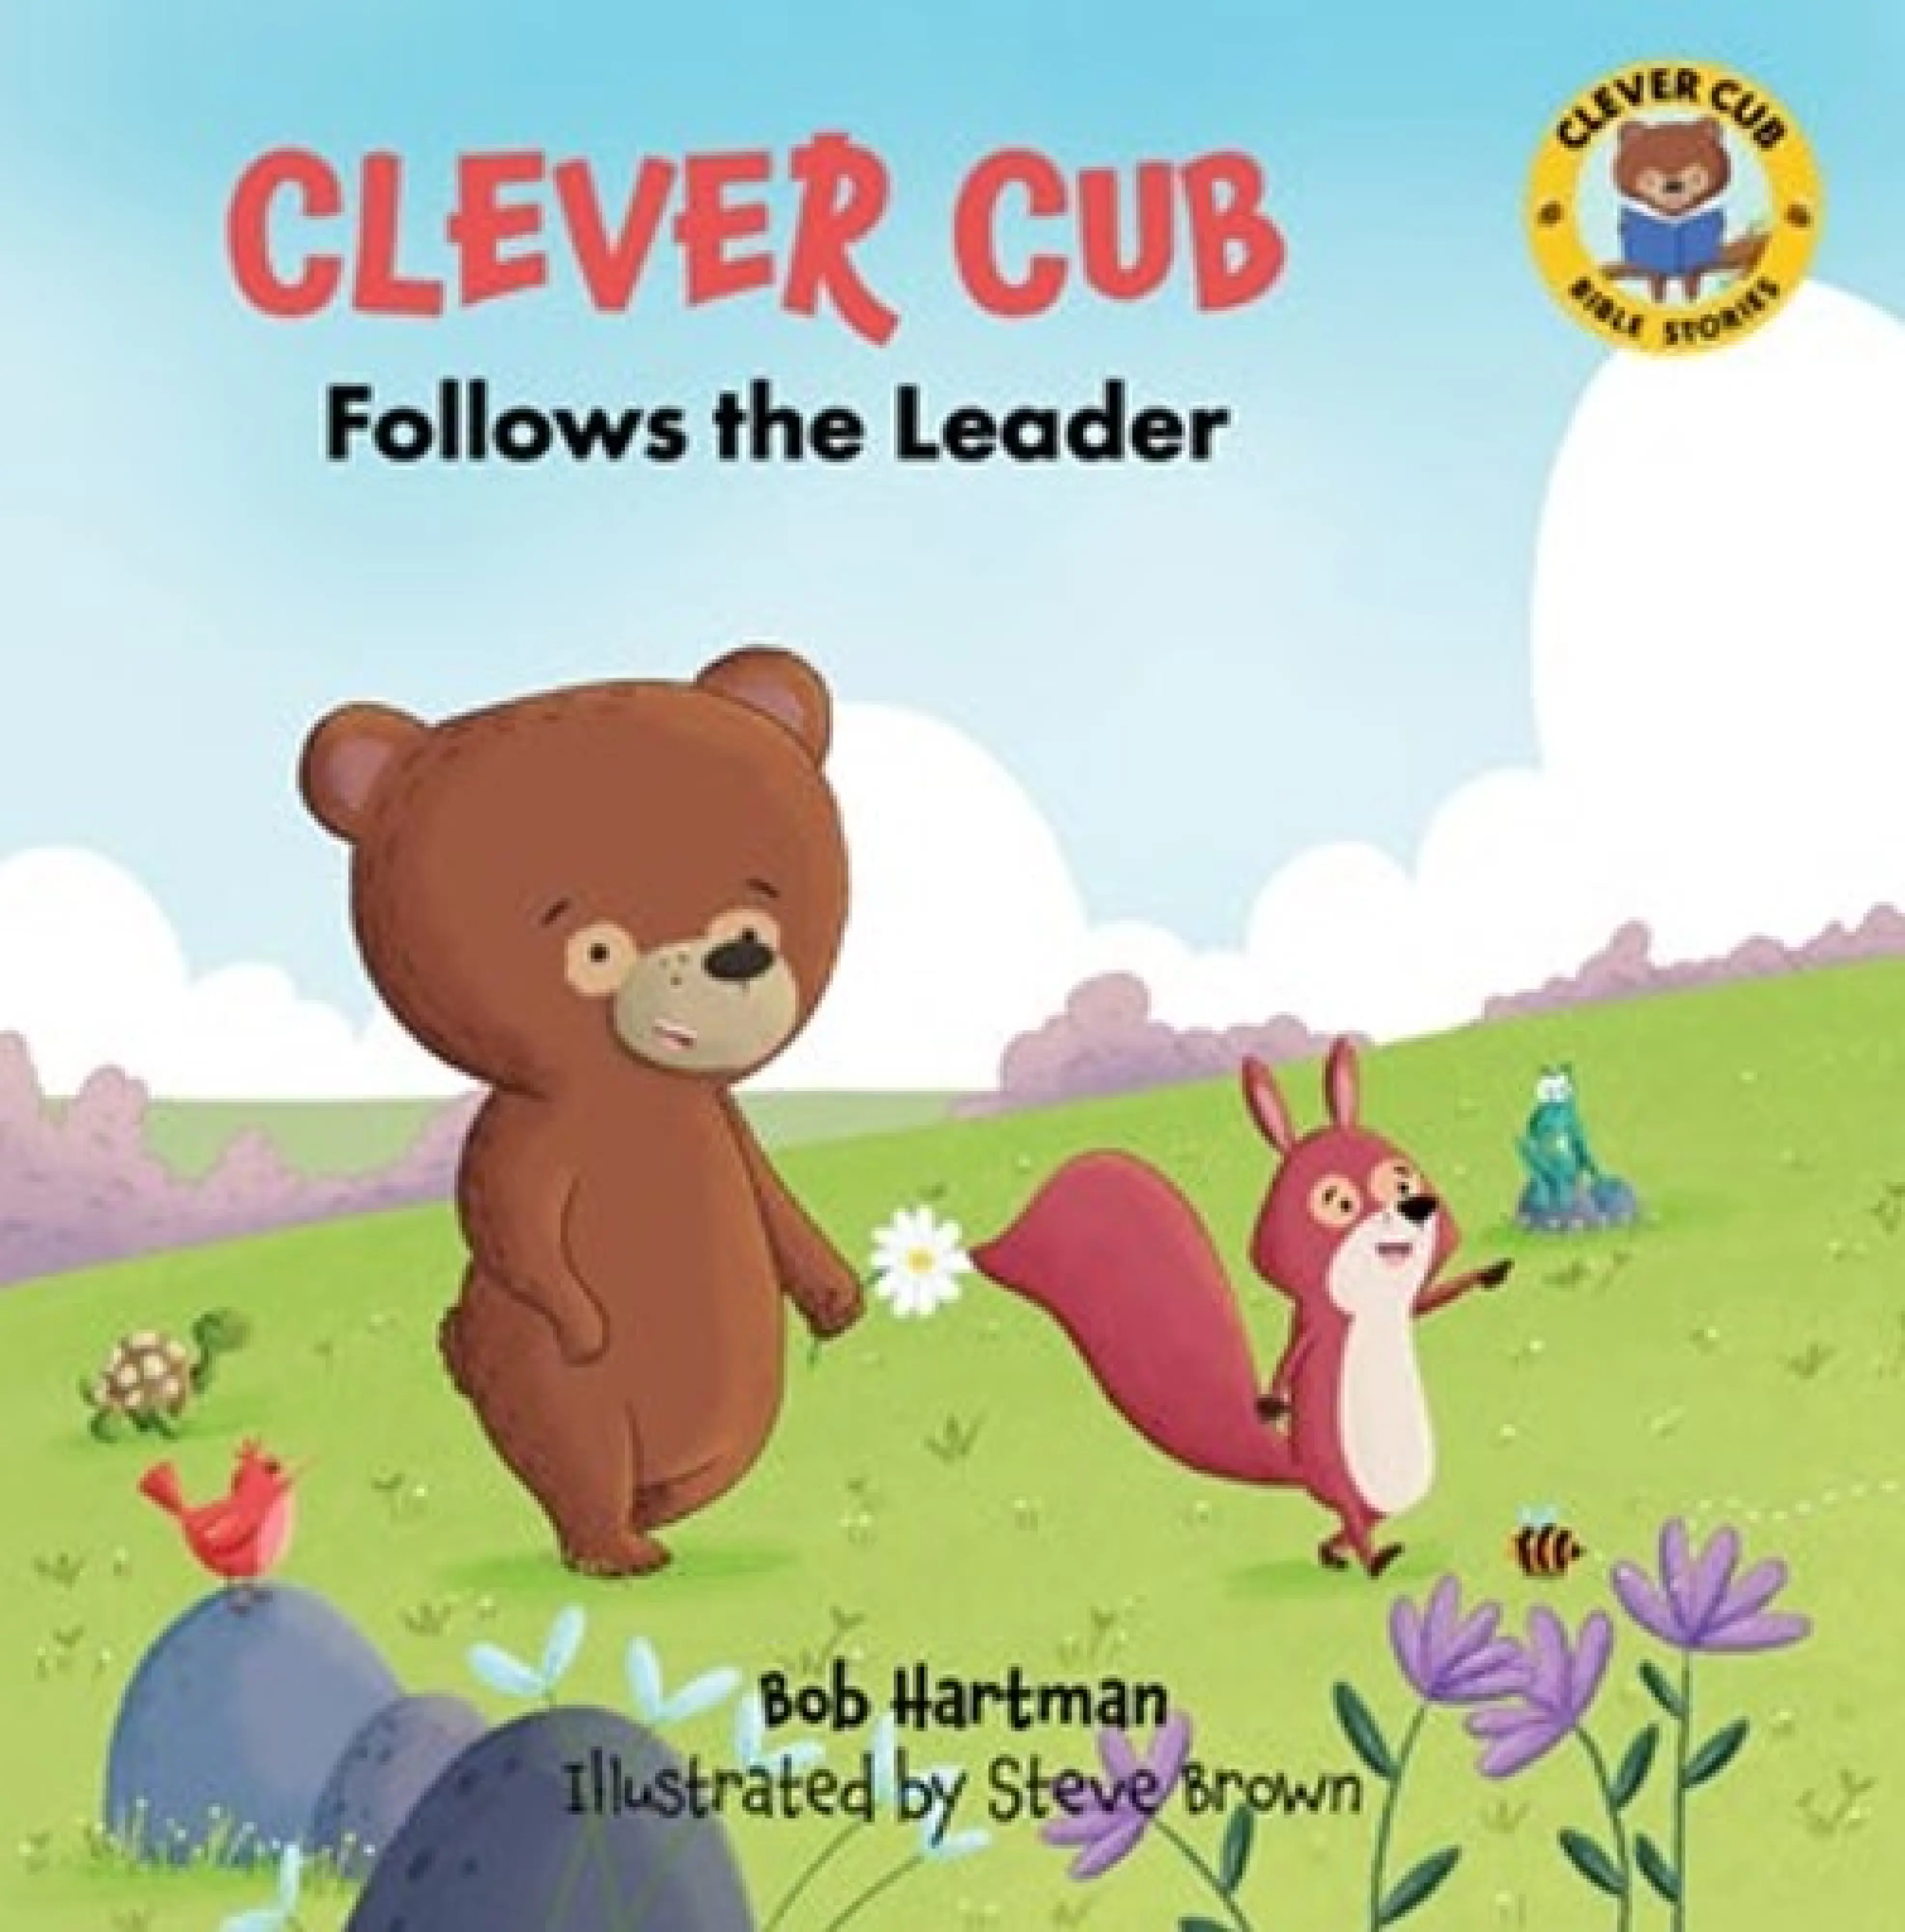 Clever Cub Follows the Leader